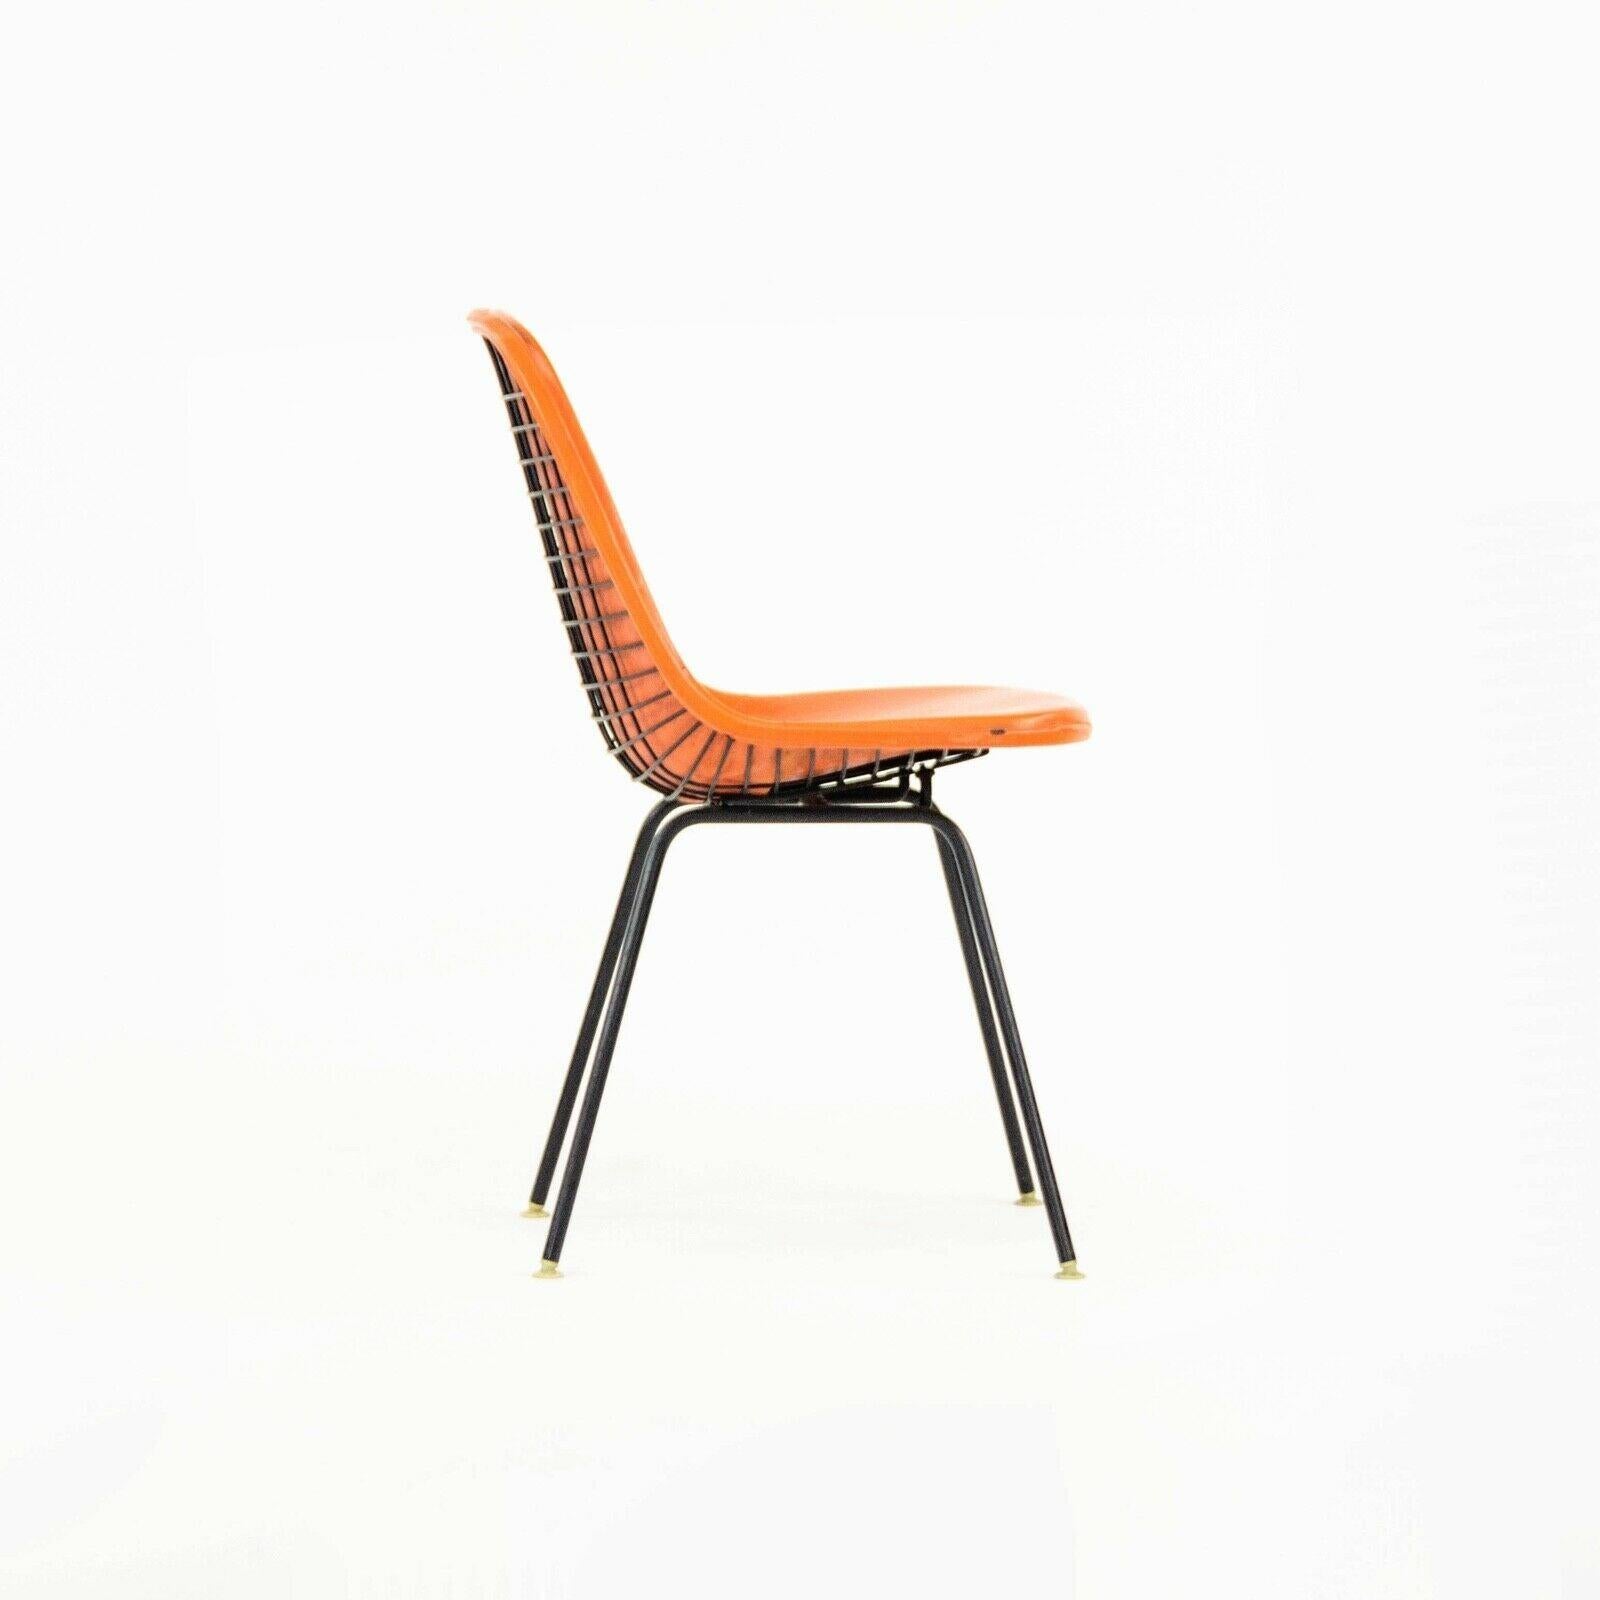 Modern 1957 Herman Miller Eames DKX Wire Dining Chair with Full Naugahyde Orange Pad For Sale